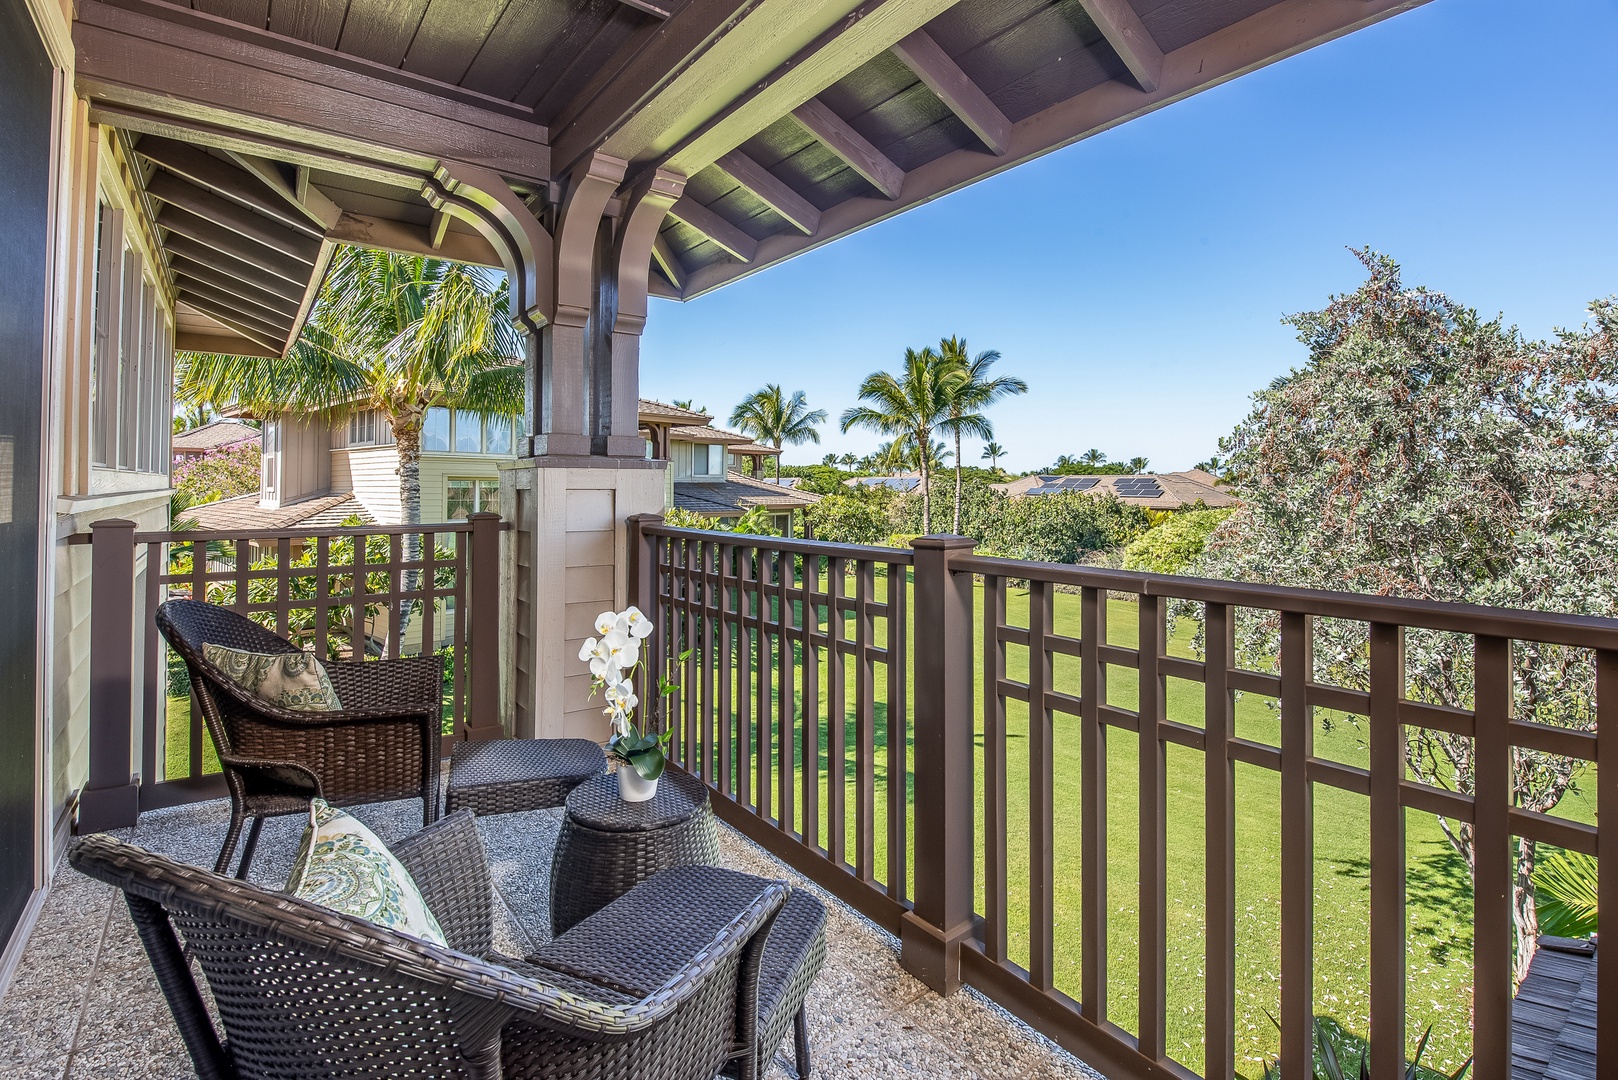 Kamuela Vacation Rentals, Kulalani 1701 at Mauna Lani - Enjoy the View and your morning coffee from your Private Balcony off the Primary bedroom